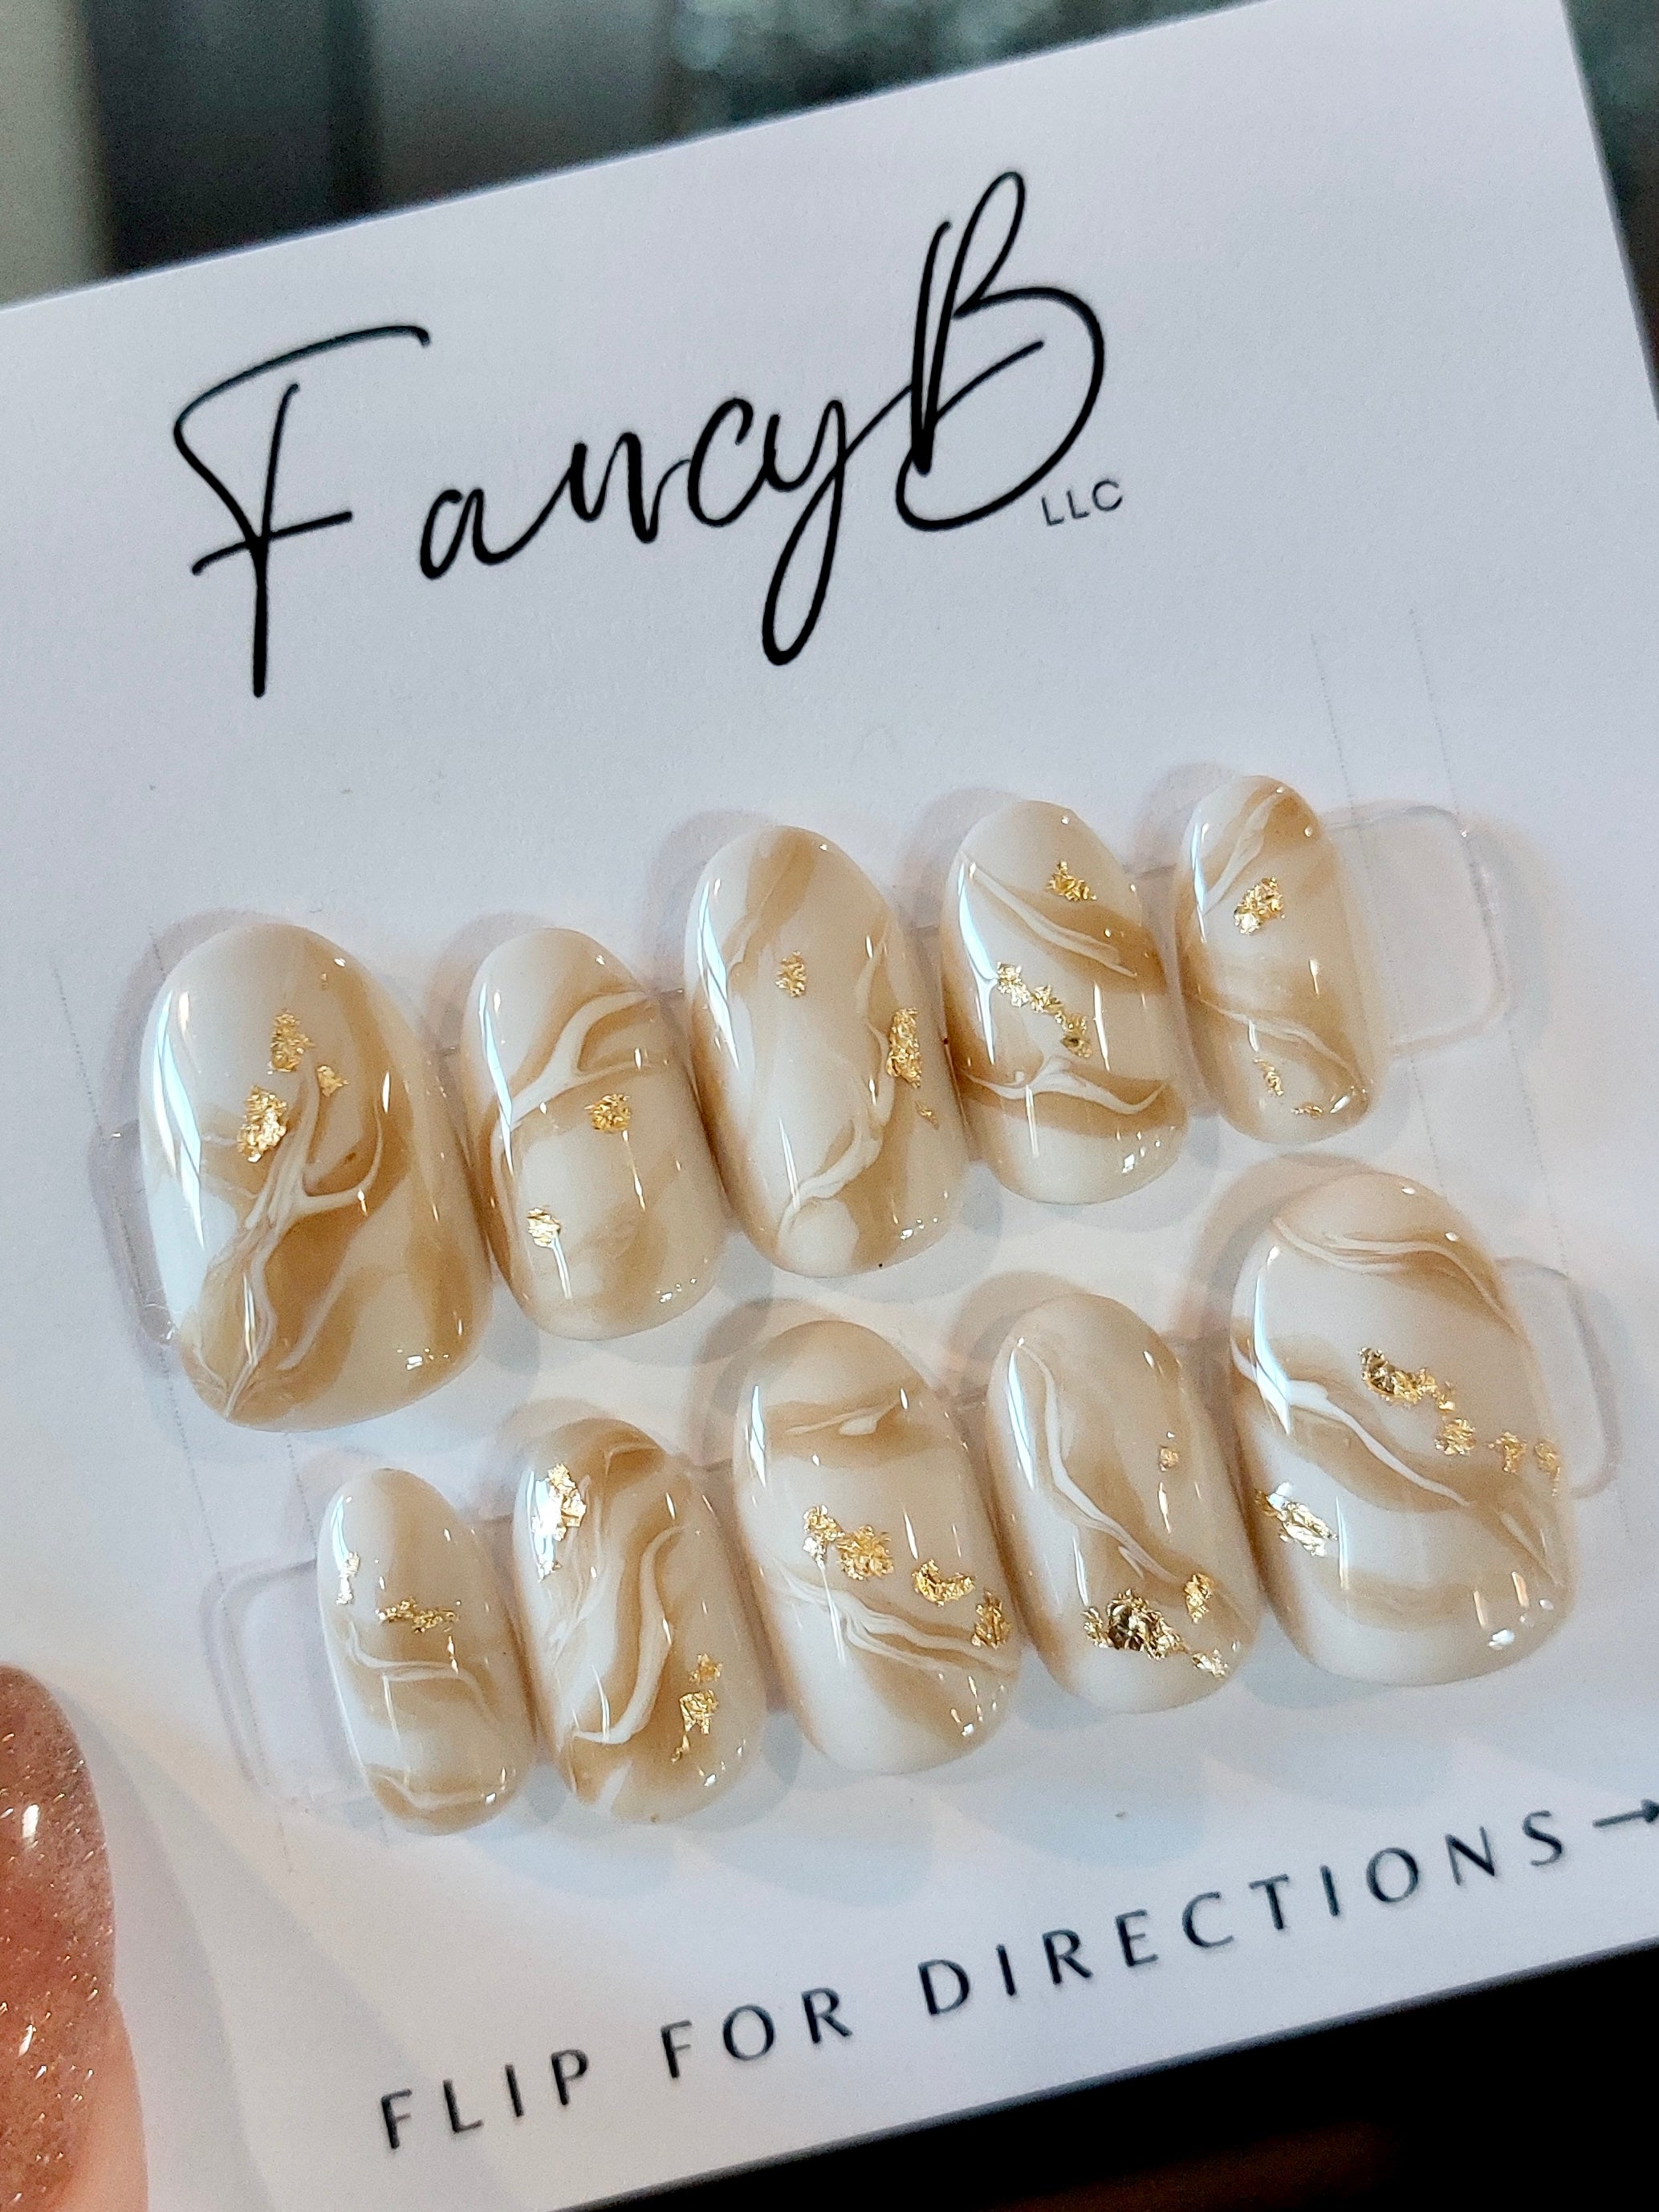 Custom press on nails fall caramel apple design with off white color and caramel swirls with gold flakes on a short oval nail shape. Fancyb Nails.